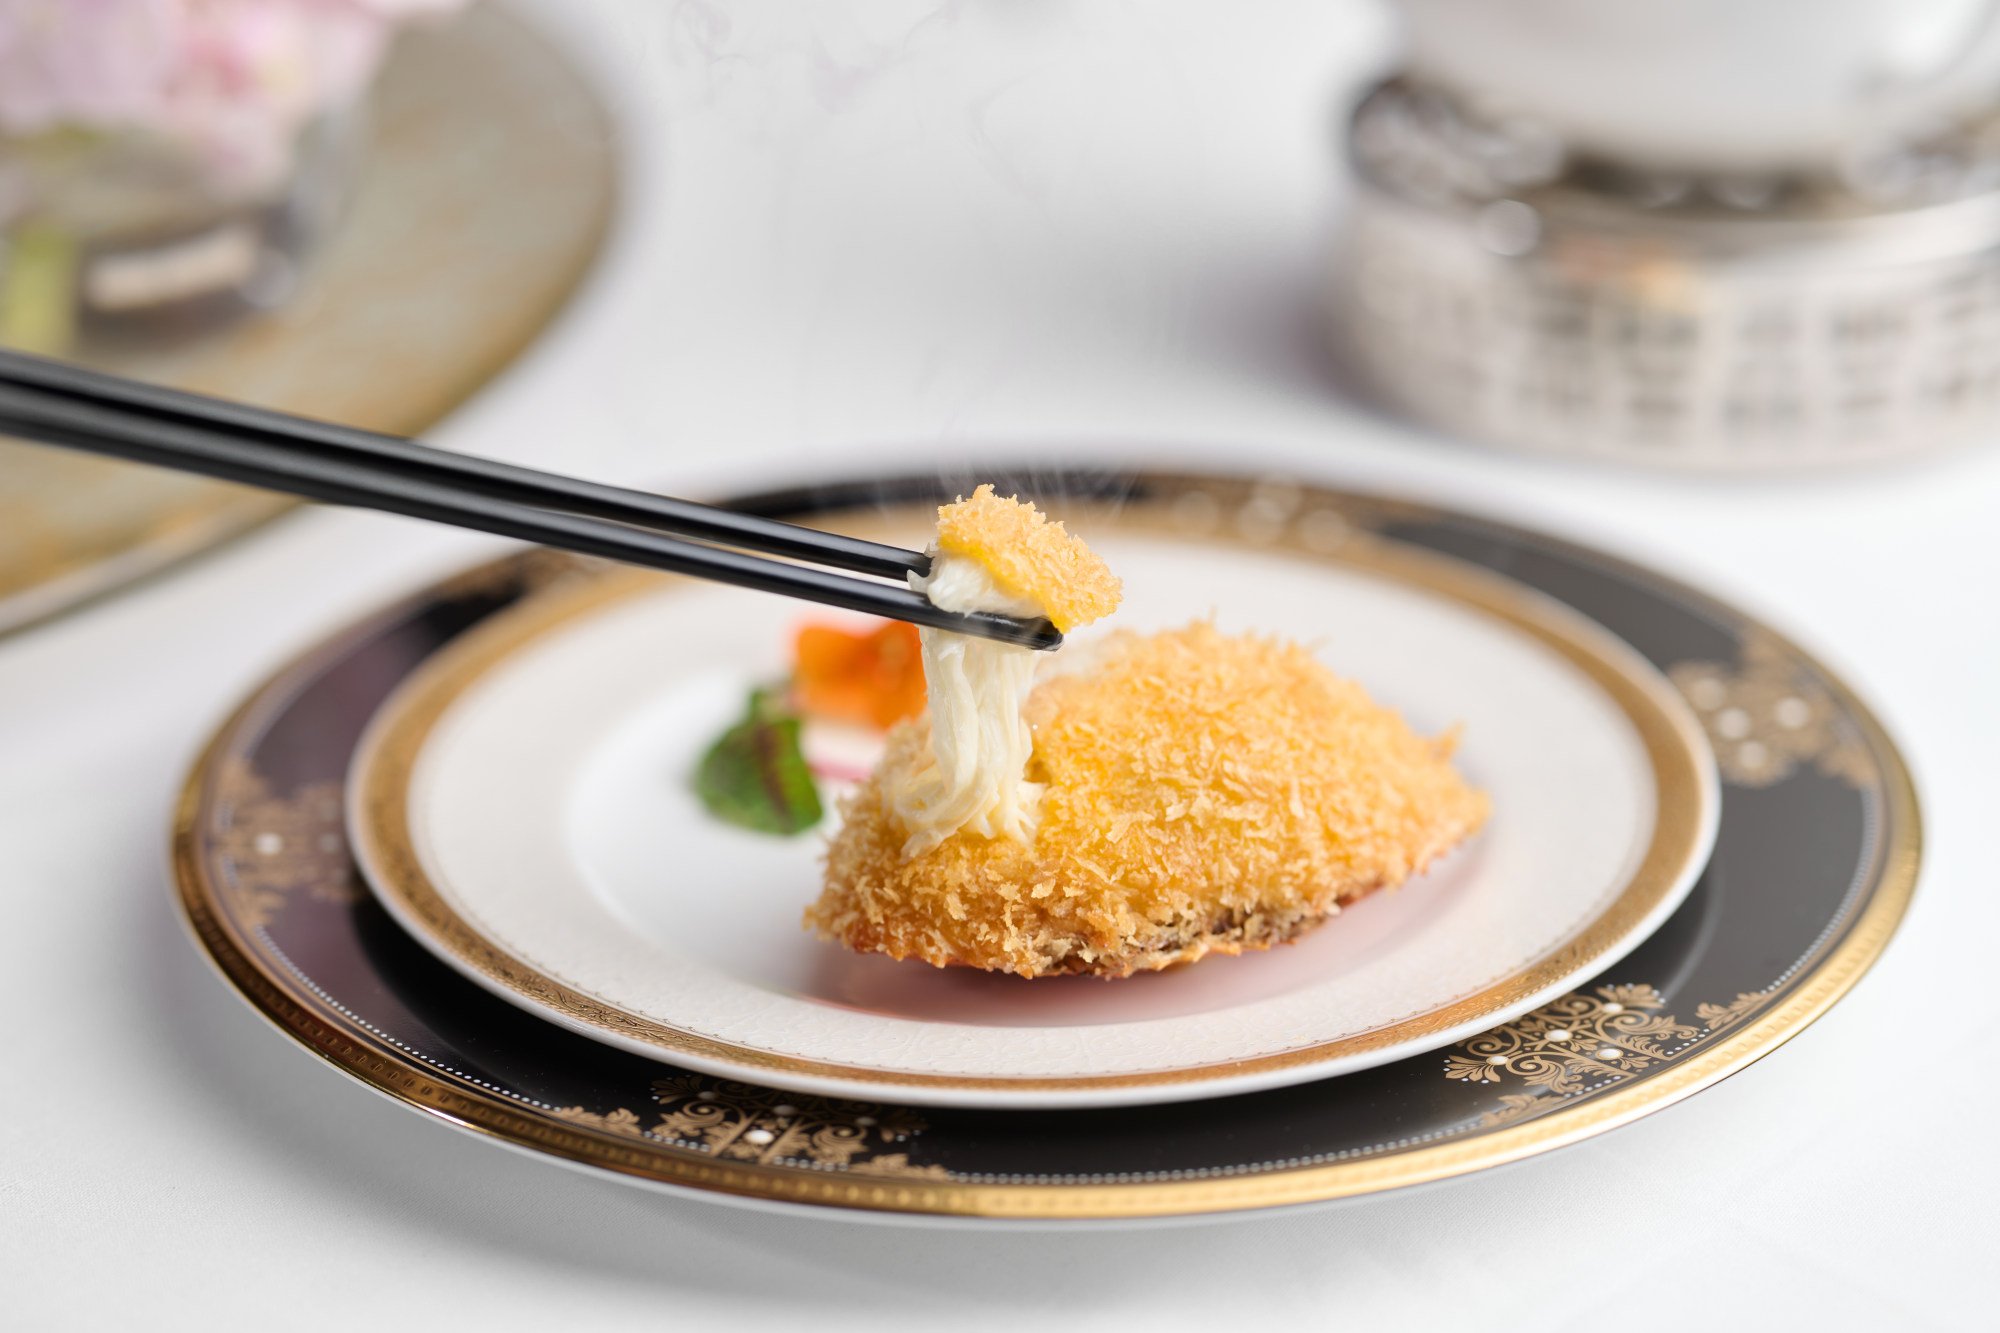 the world is borrowing from cantonese cuisine – but is it a threat to authenticity?